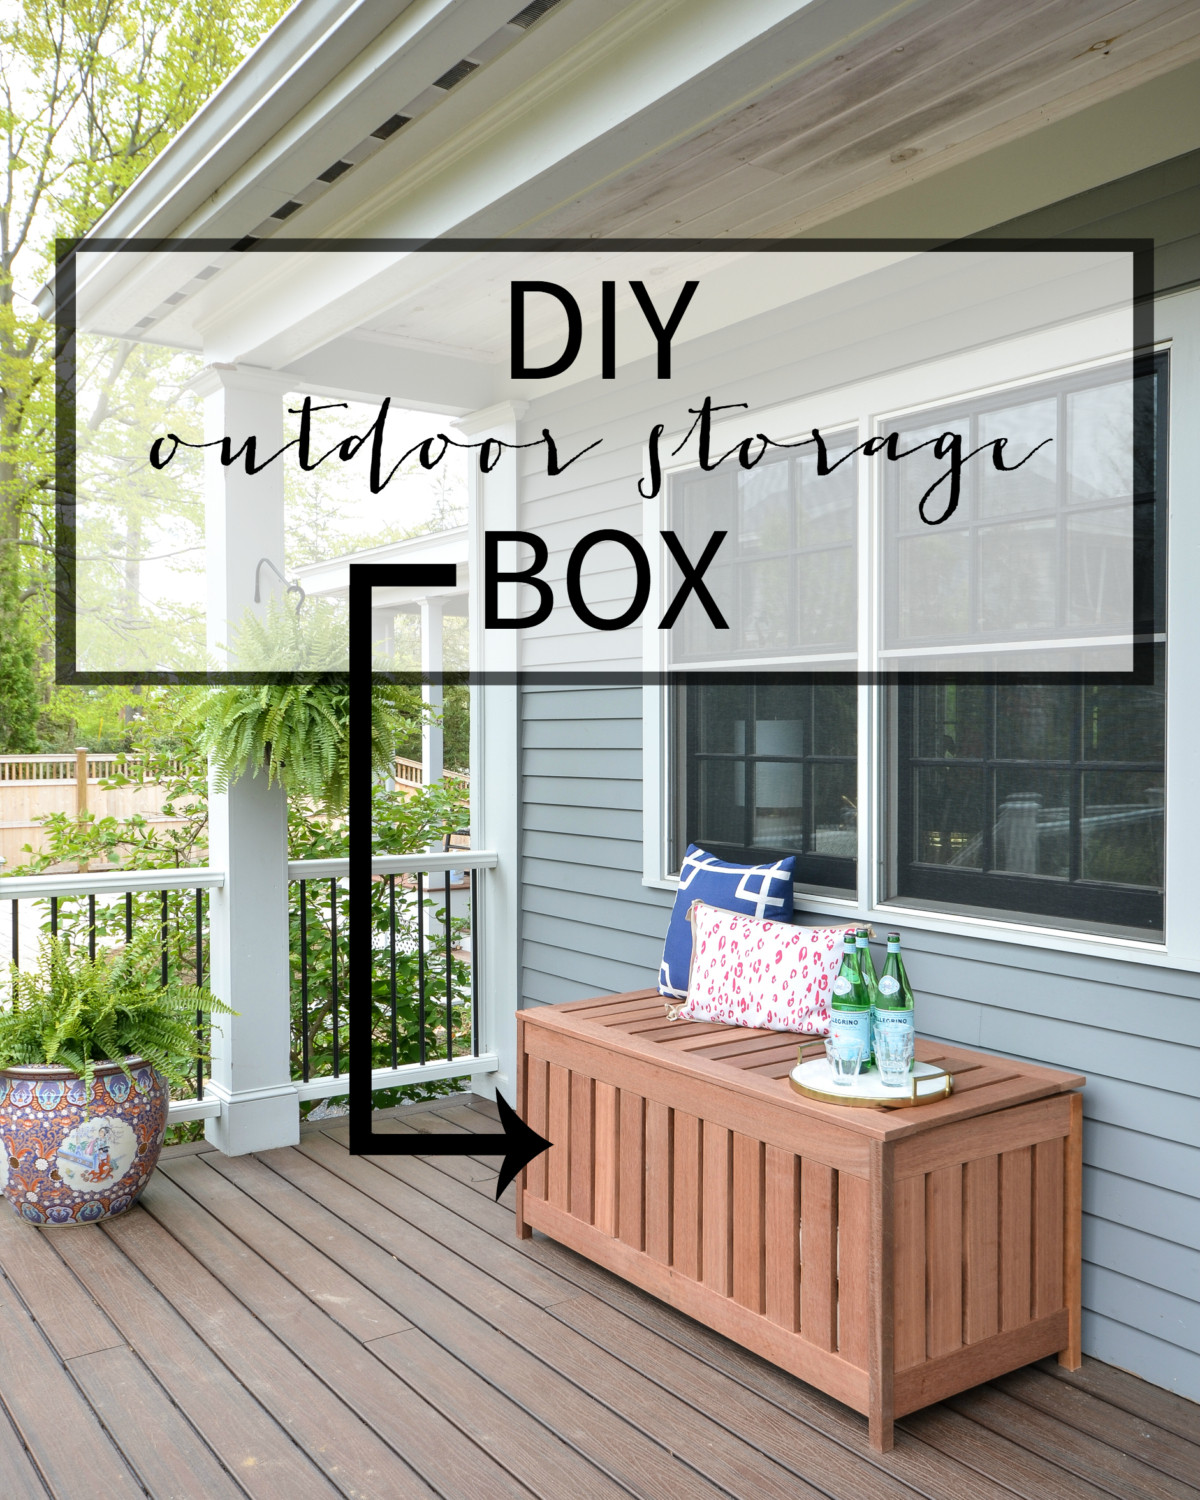 DIY Outdoor Bench Cushion
 DIY Outdoor Storage Box The Chronicles of Home